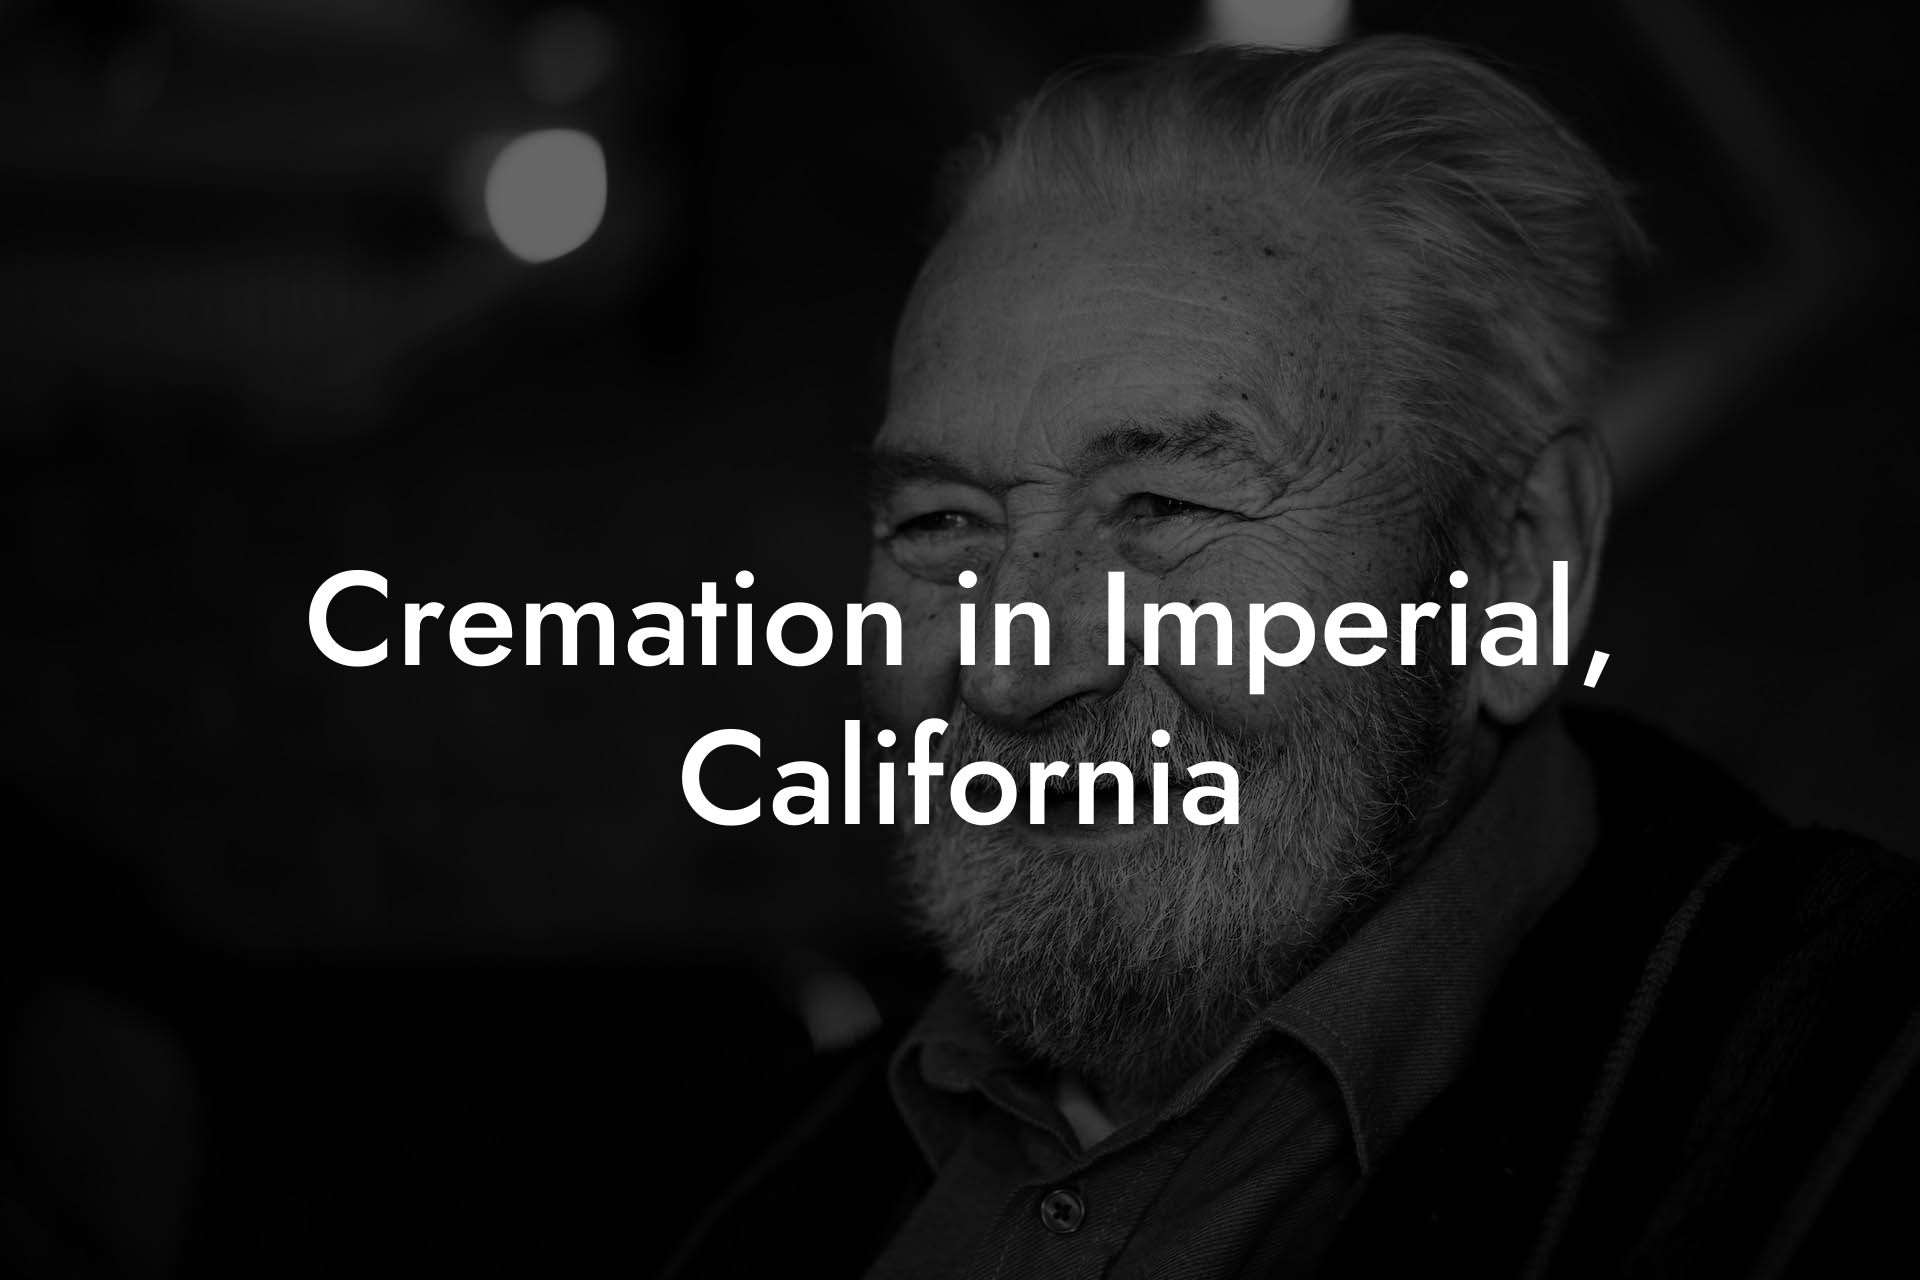 Cremation in Imperial, California